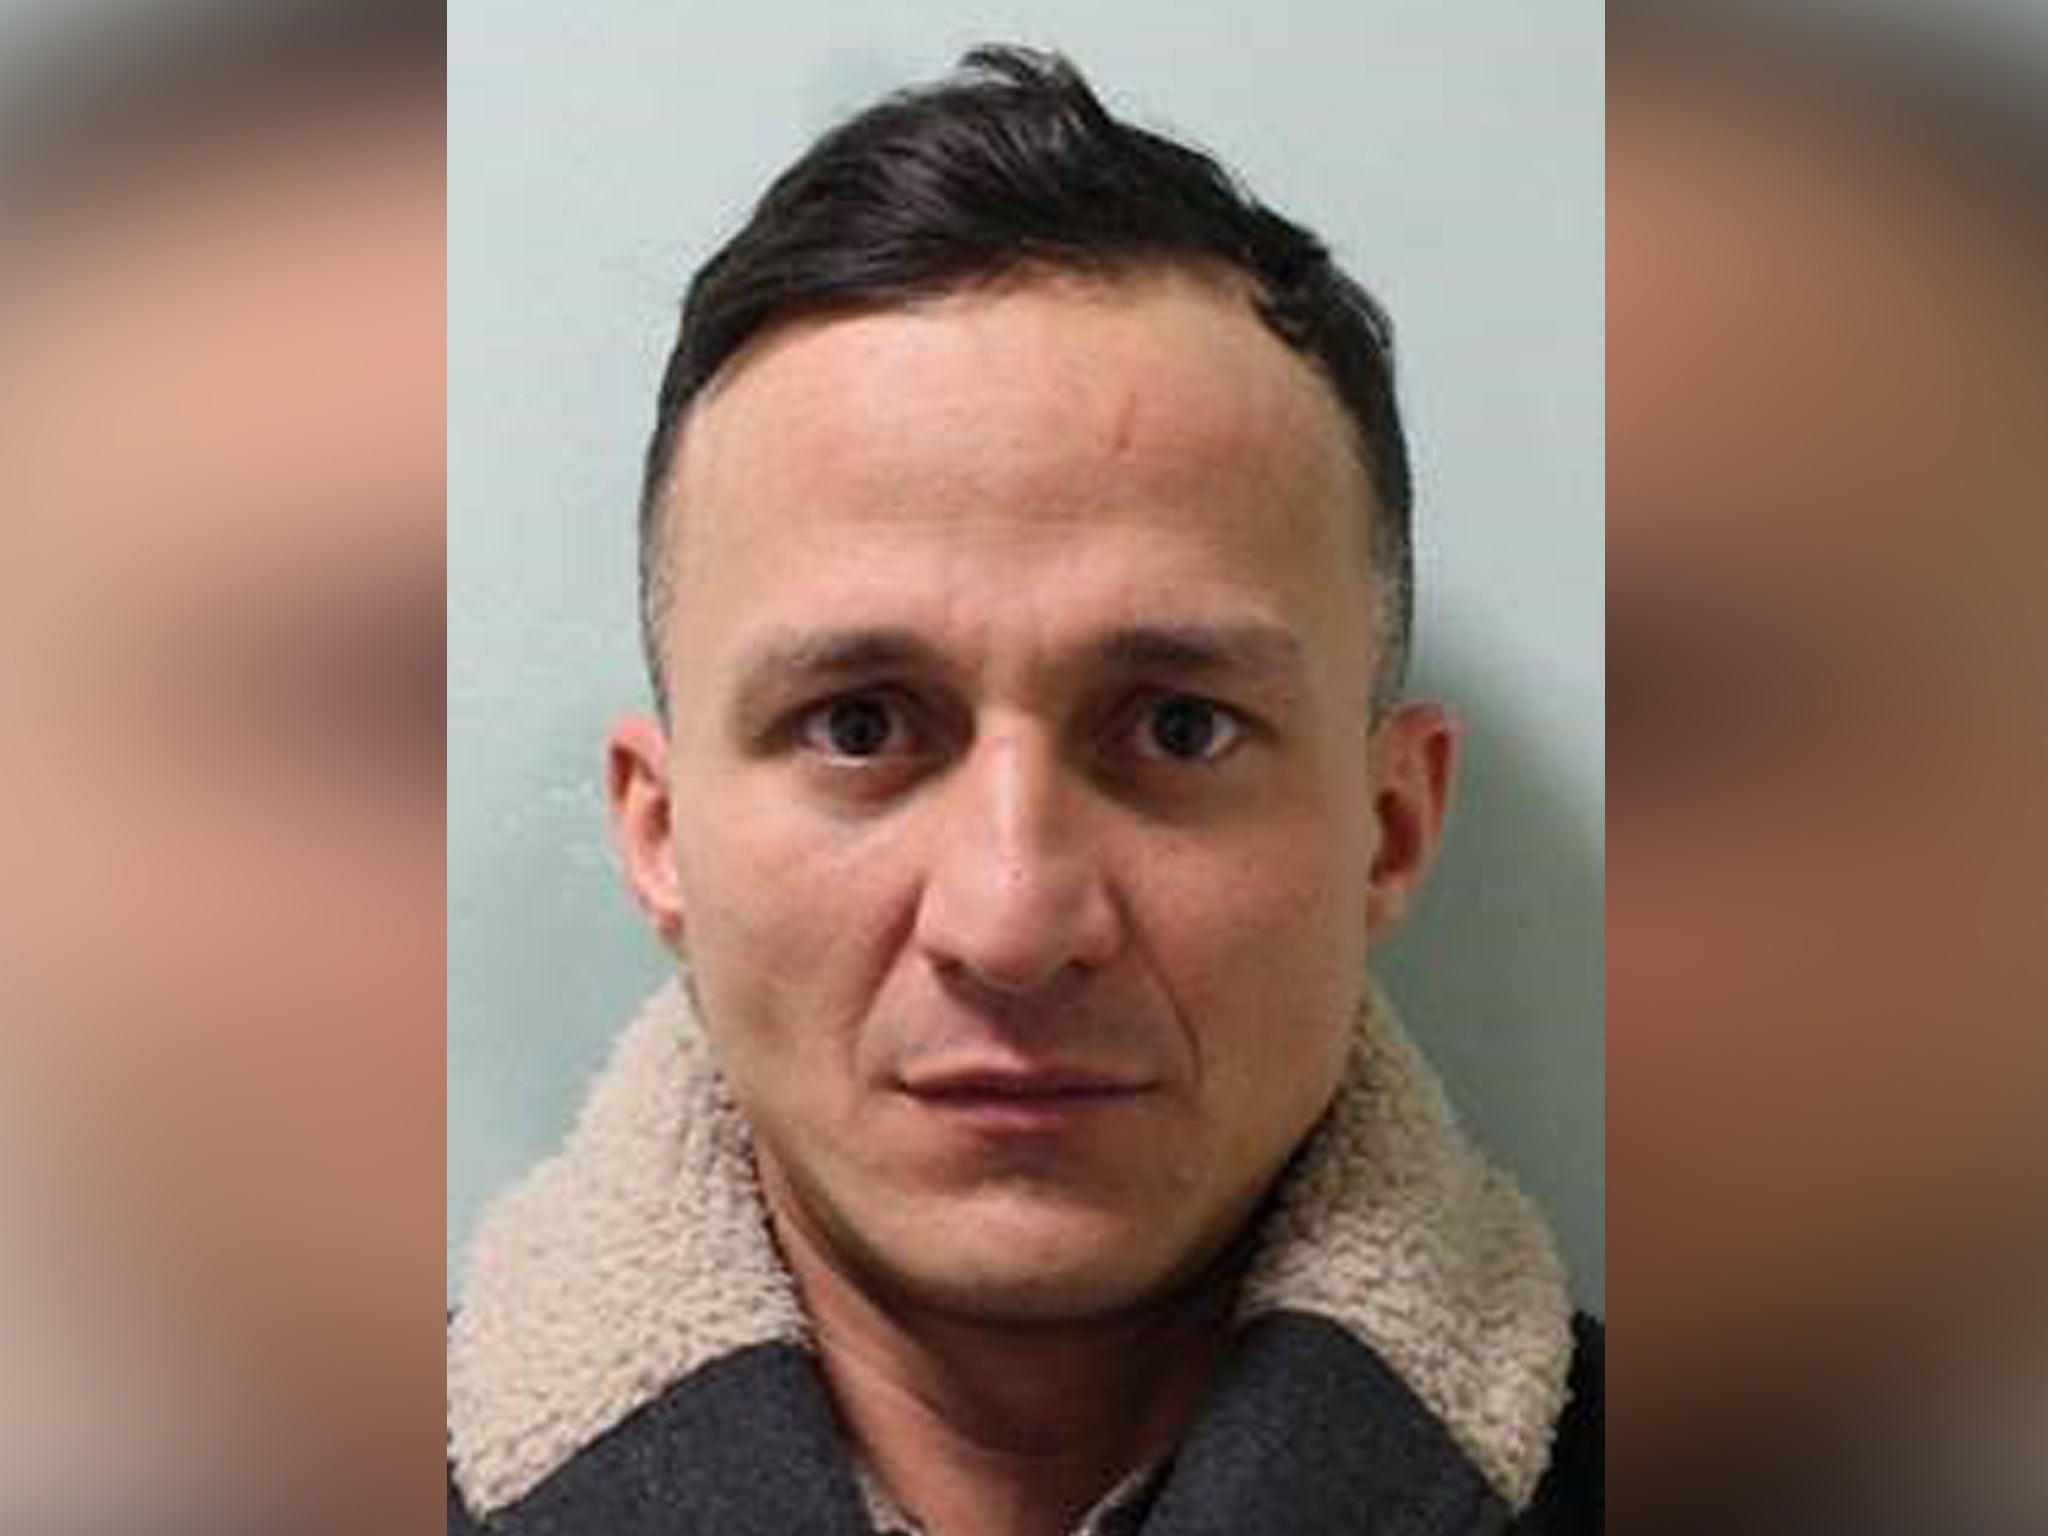 Ciro Troyano, 40, is sought by detectives over a jewellery robbery that left a man with serious injuries